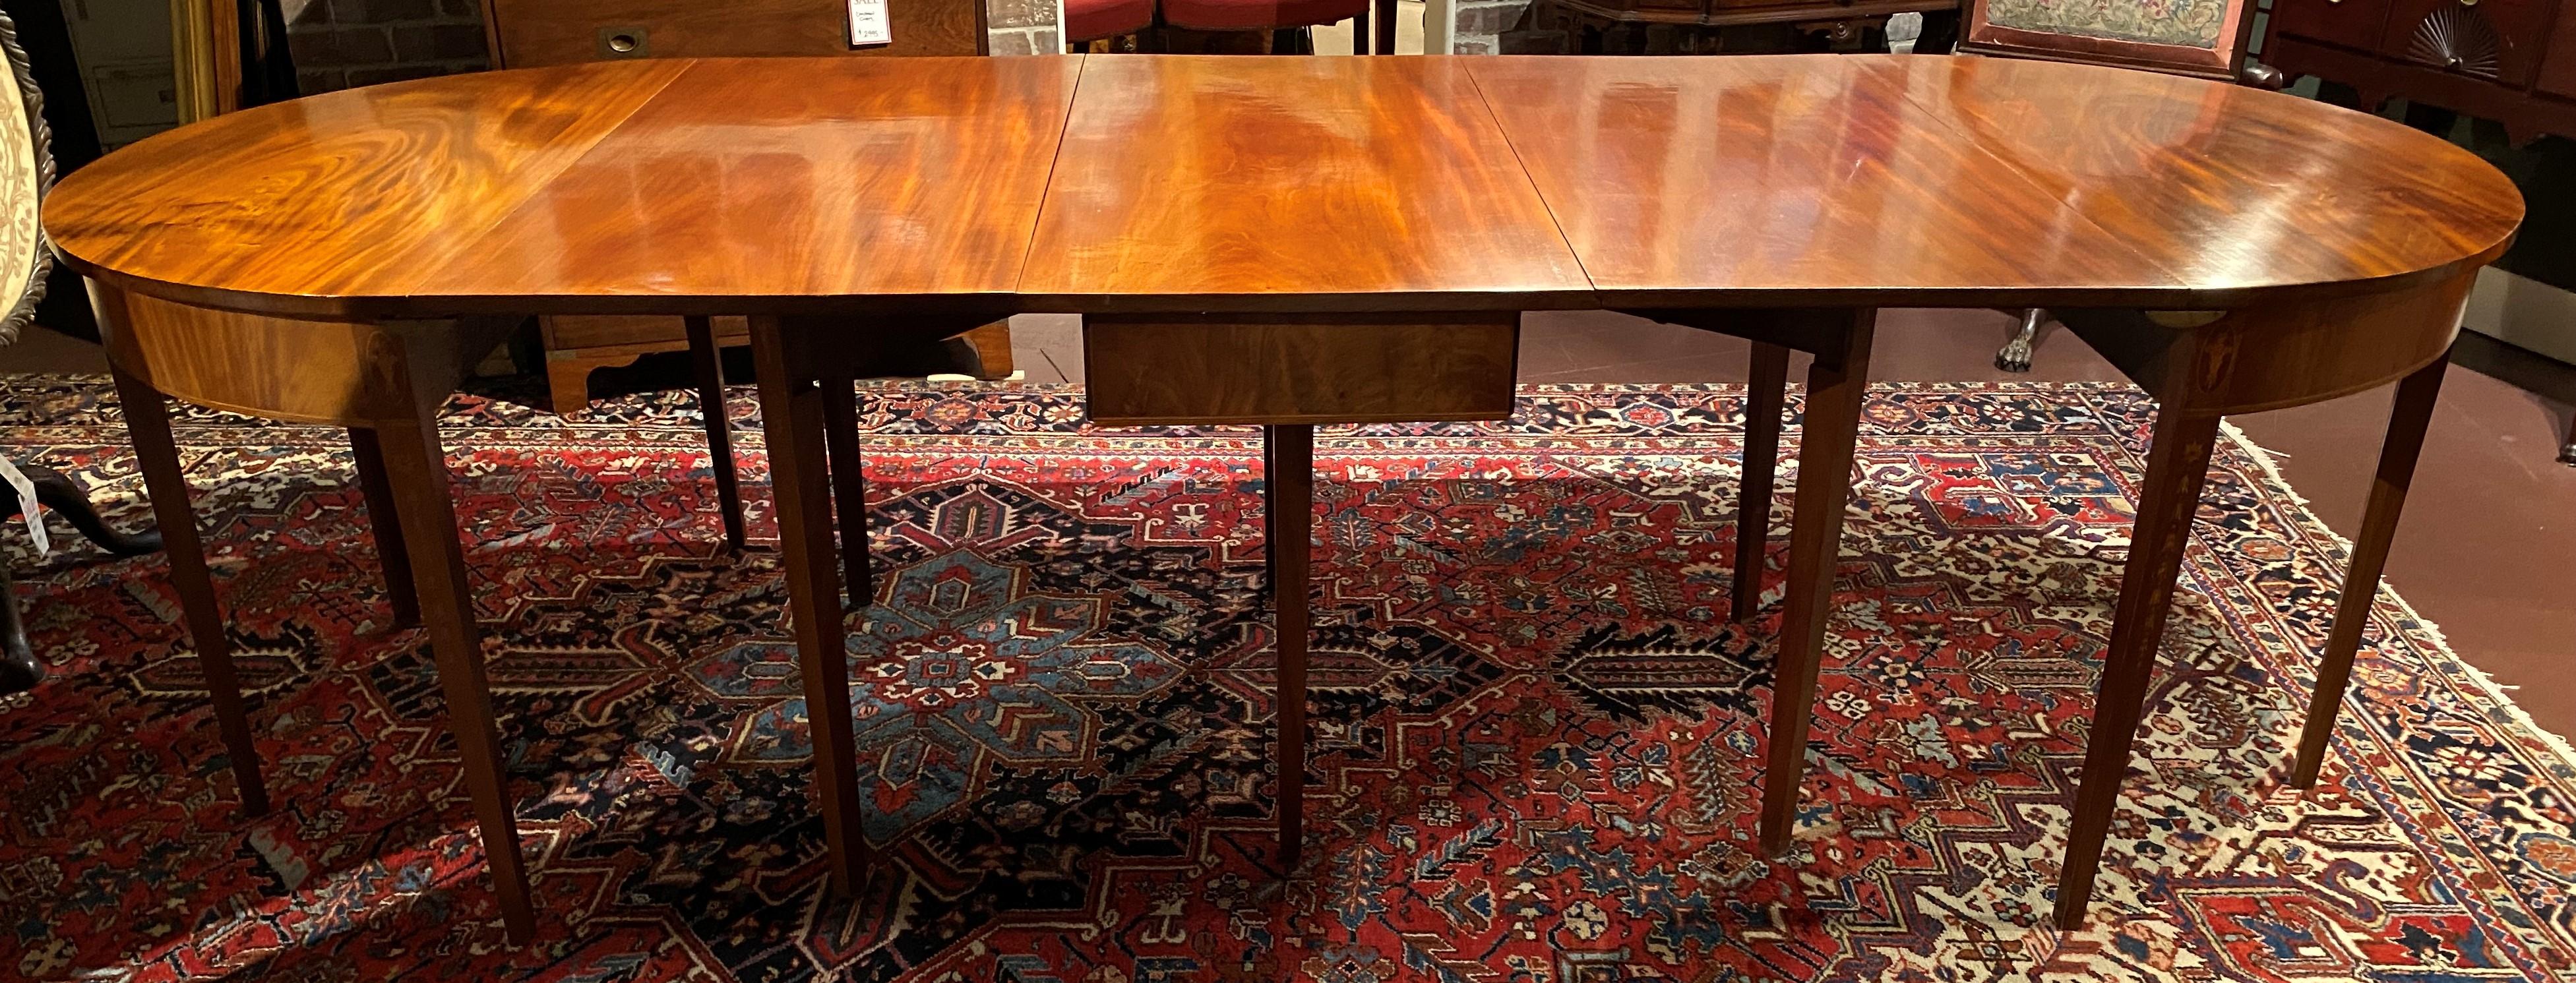 19th c Federal Mahogany Dining Table with “D” Ends & Center Dropleaf 9